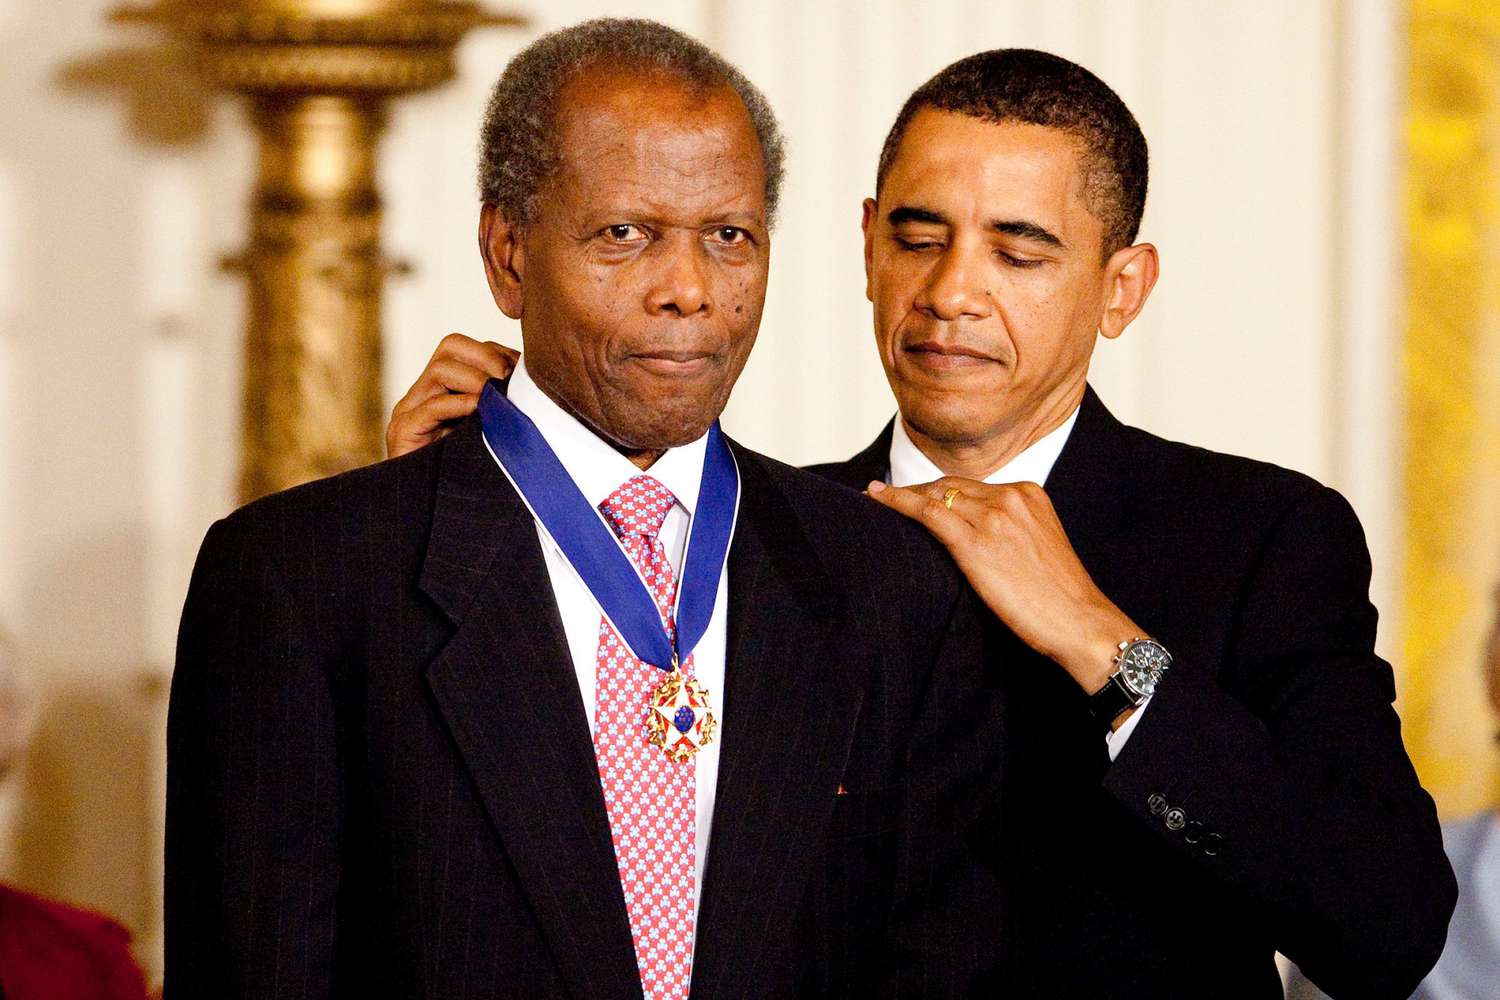 Sidney Poitier receives the 2009 Presidential Medal of Freedom from U.S. President Barack Obama during a ceremony in the East Room of the White House in Washington, D.C., U.S., on Wednesday, Aug. 12, 2009